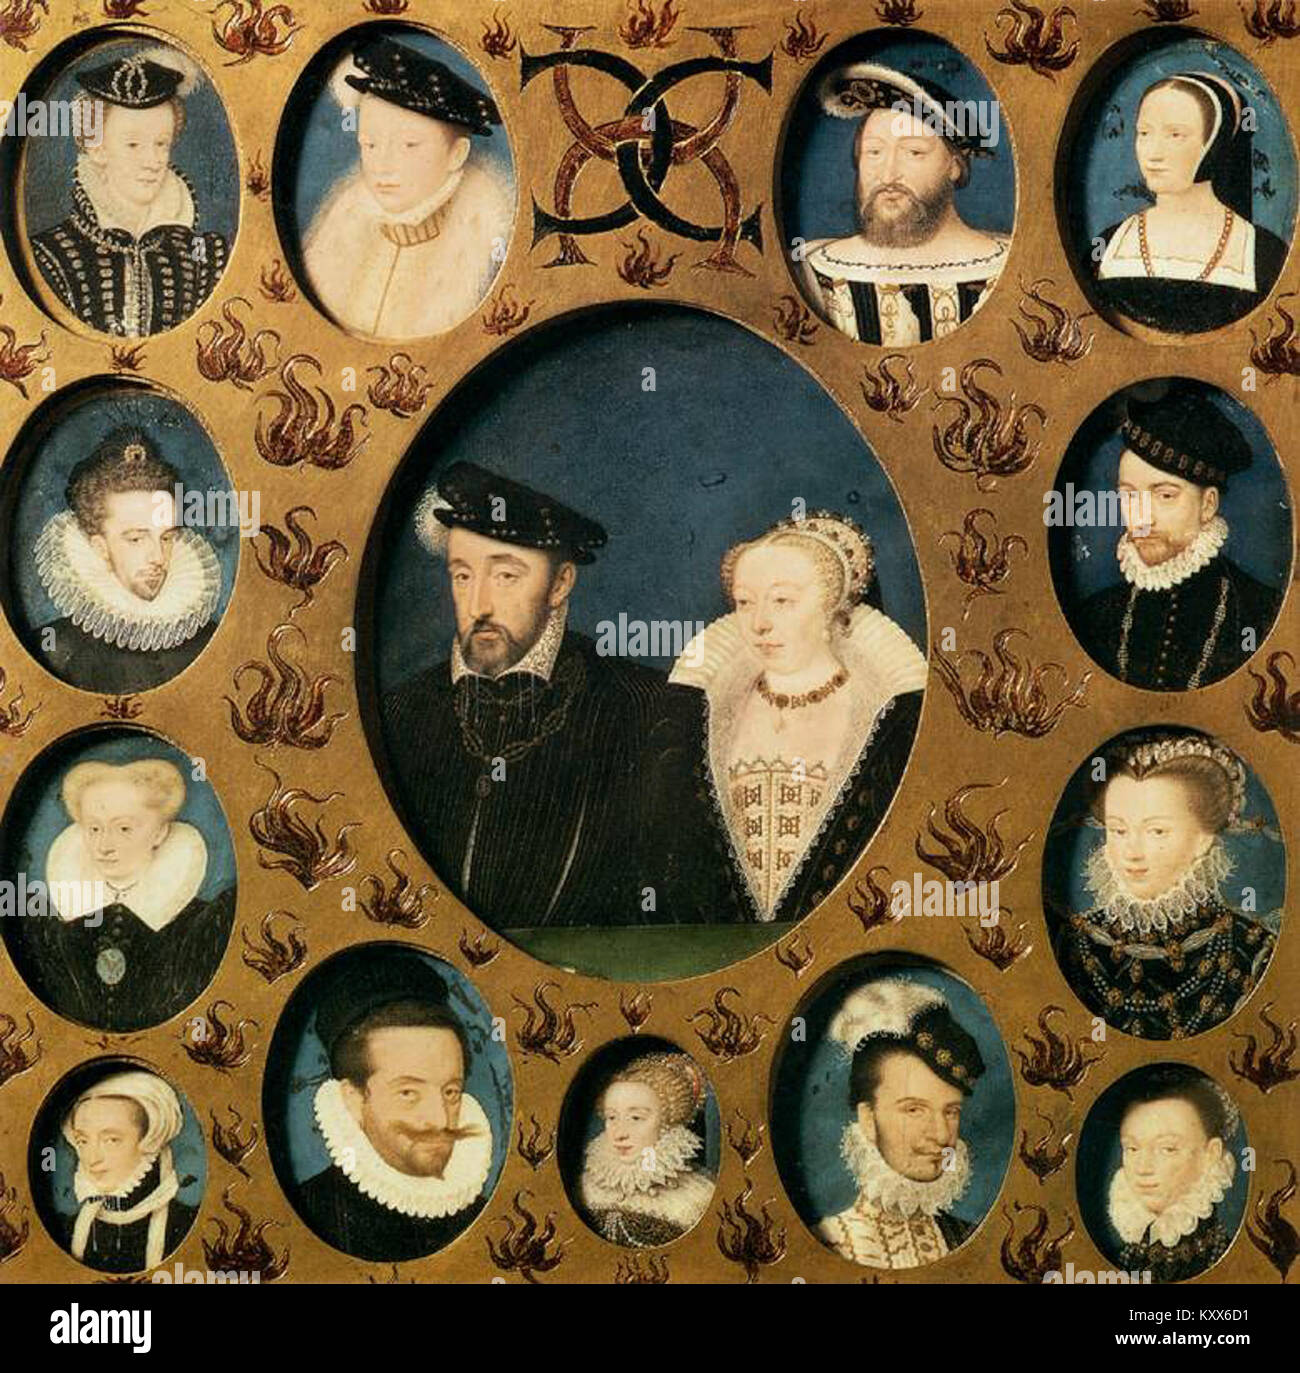 François Clouet - Henri II of Valois and Caterina de' Medici, Surrounded by Members of Their Family - WGA05074 Stock Photo